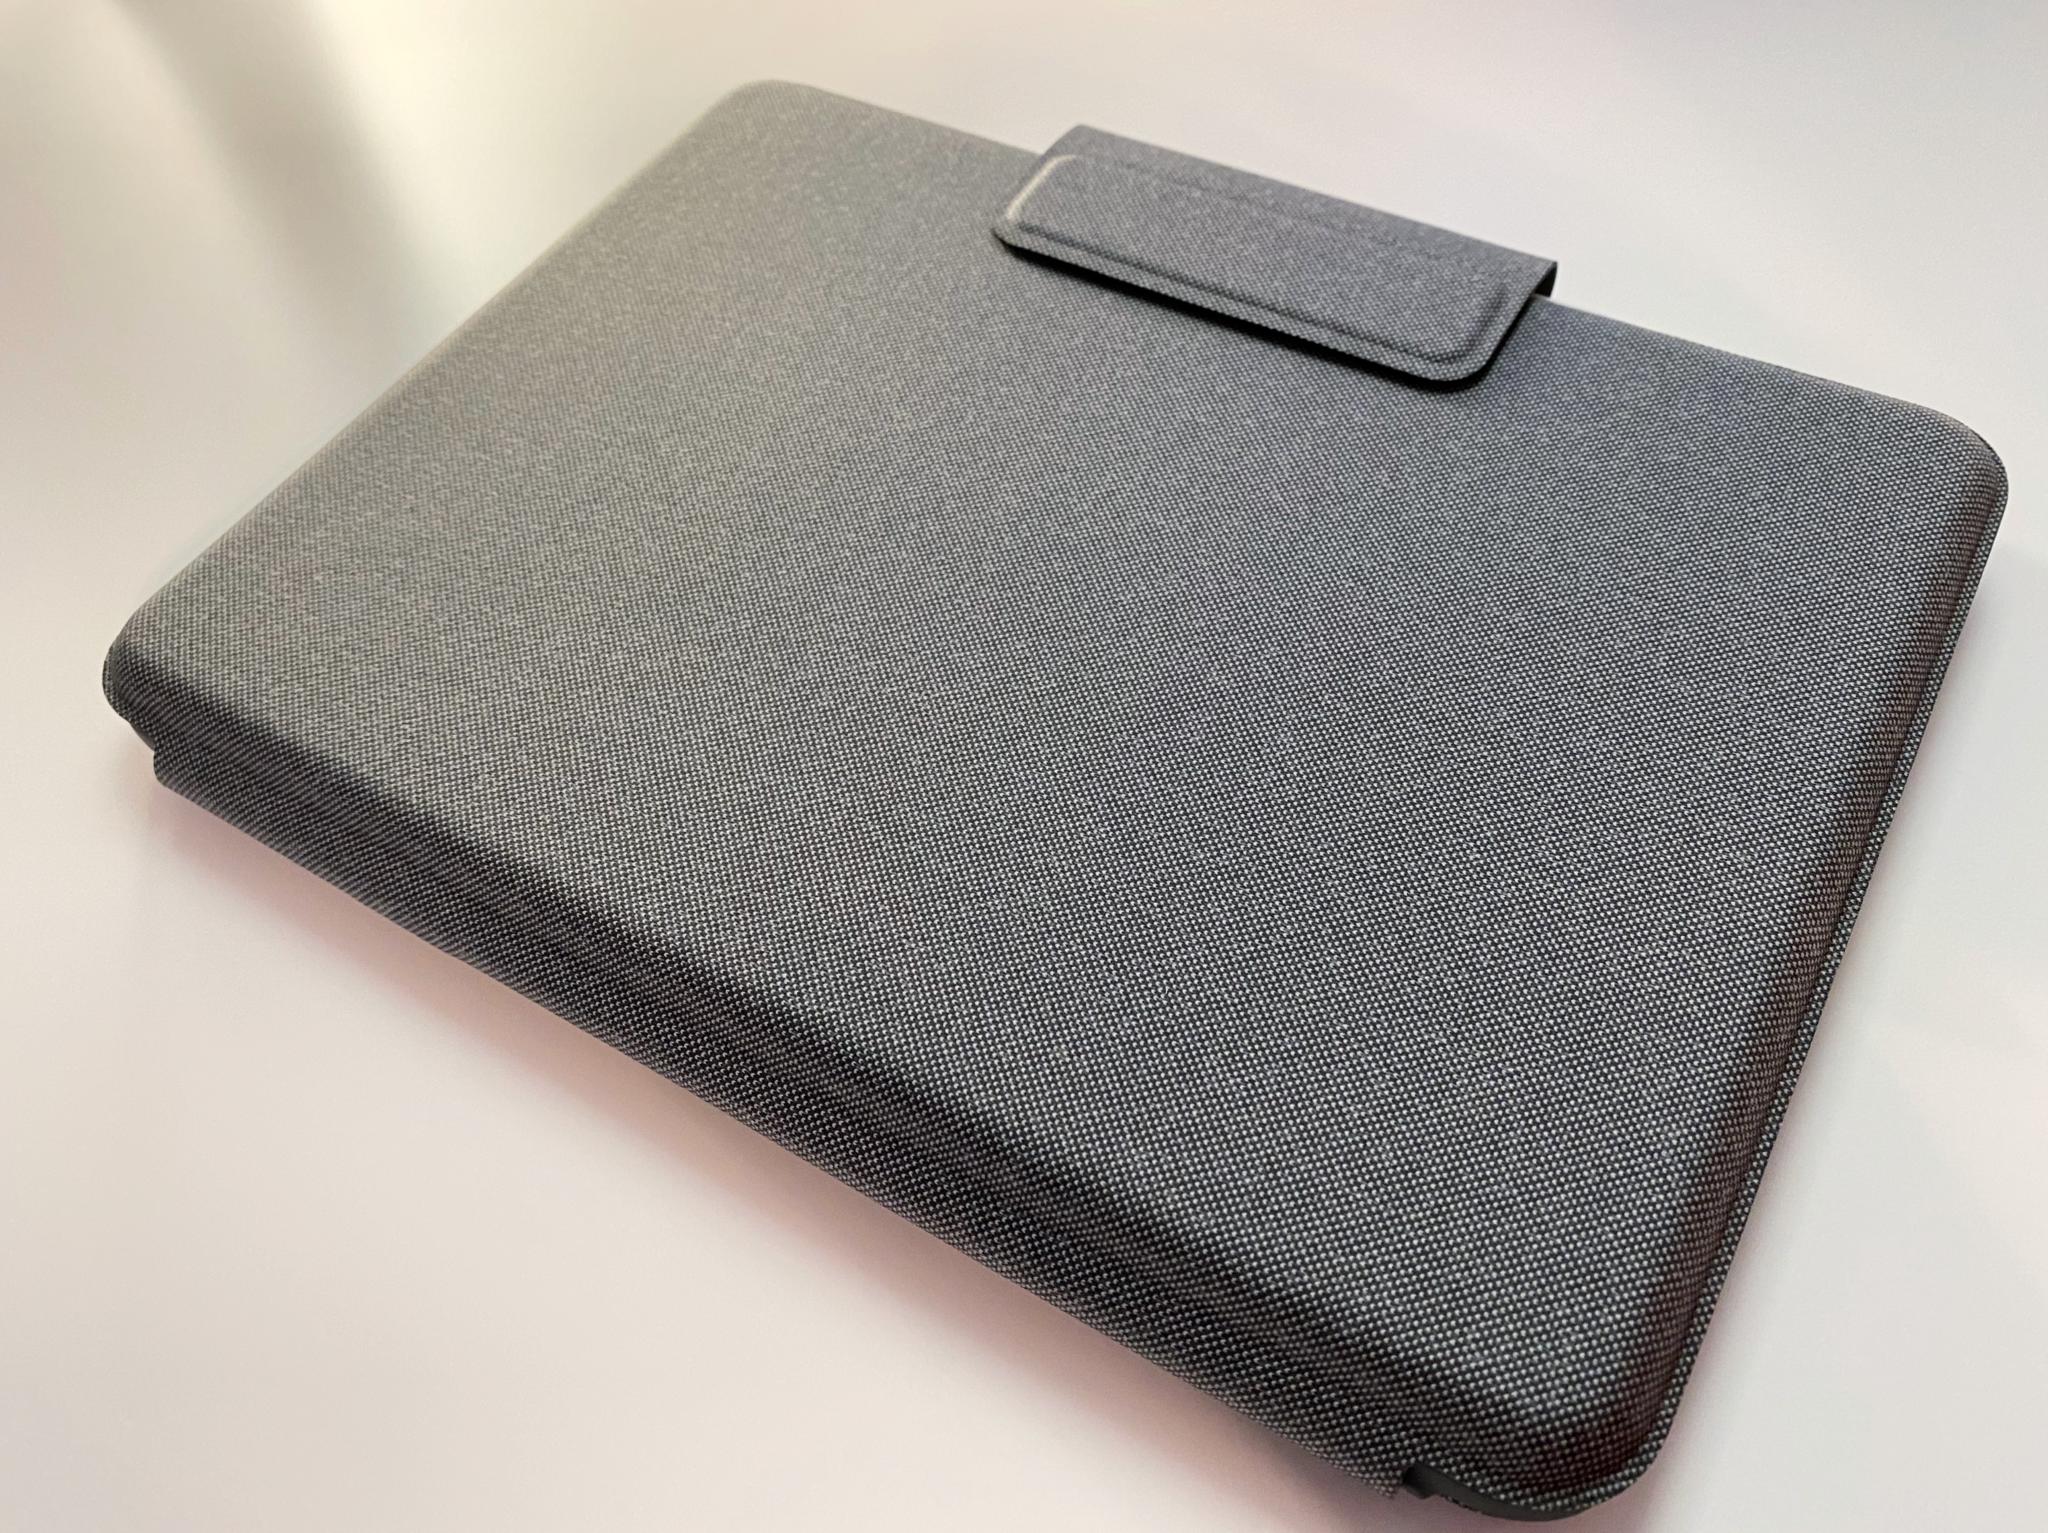 Logitech Folio Touch For Ipad Air 4 Review Closed